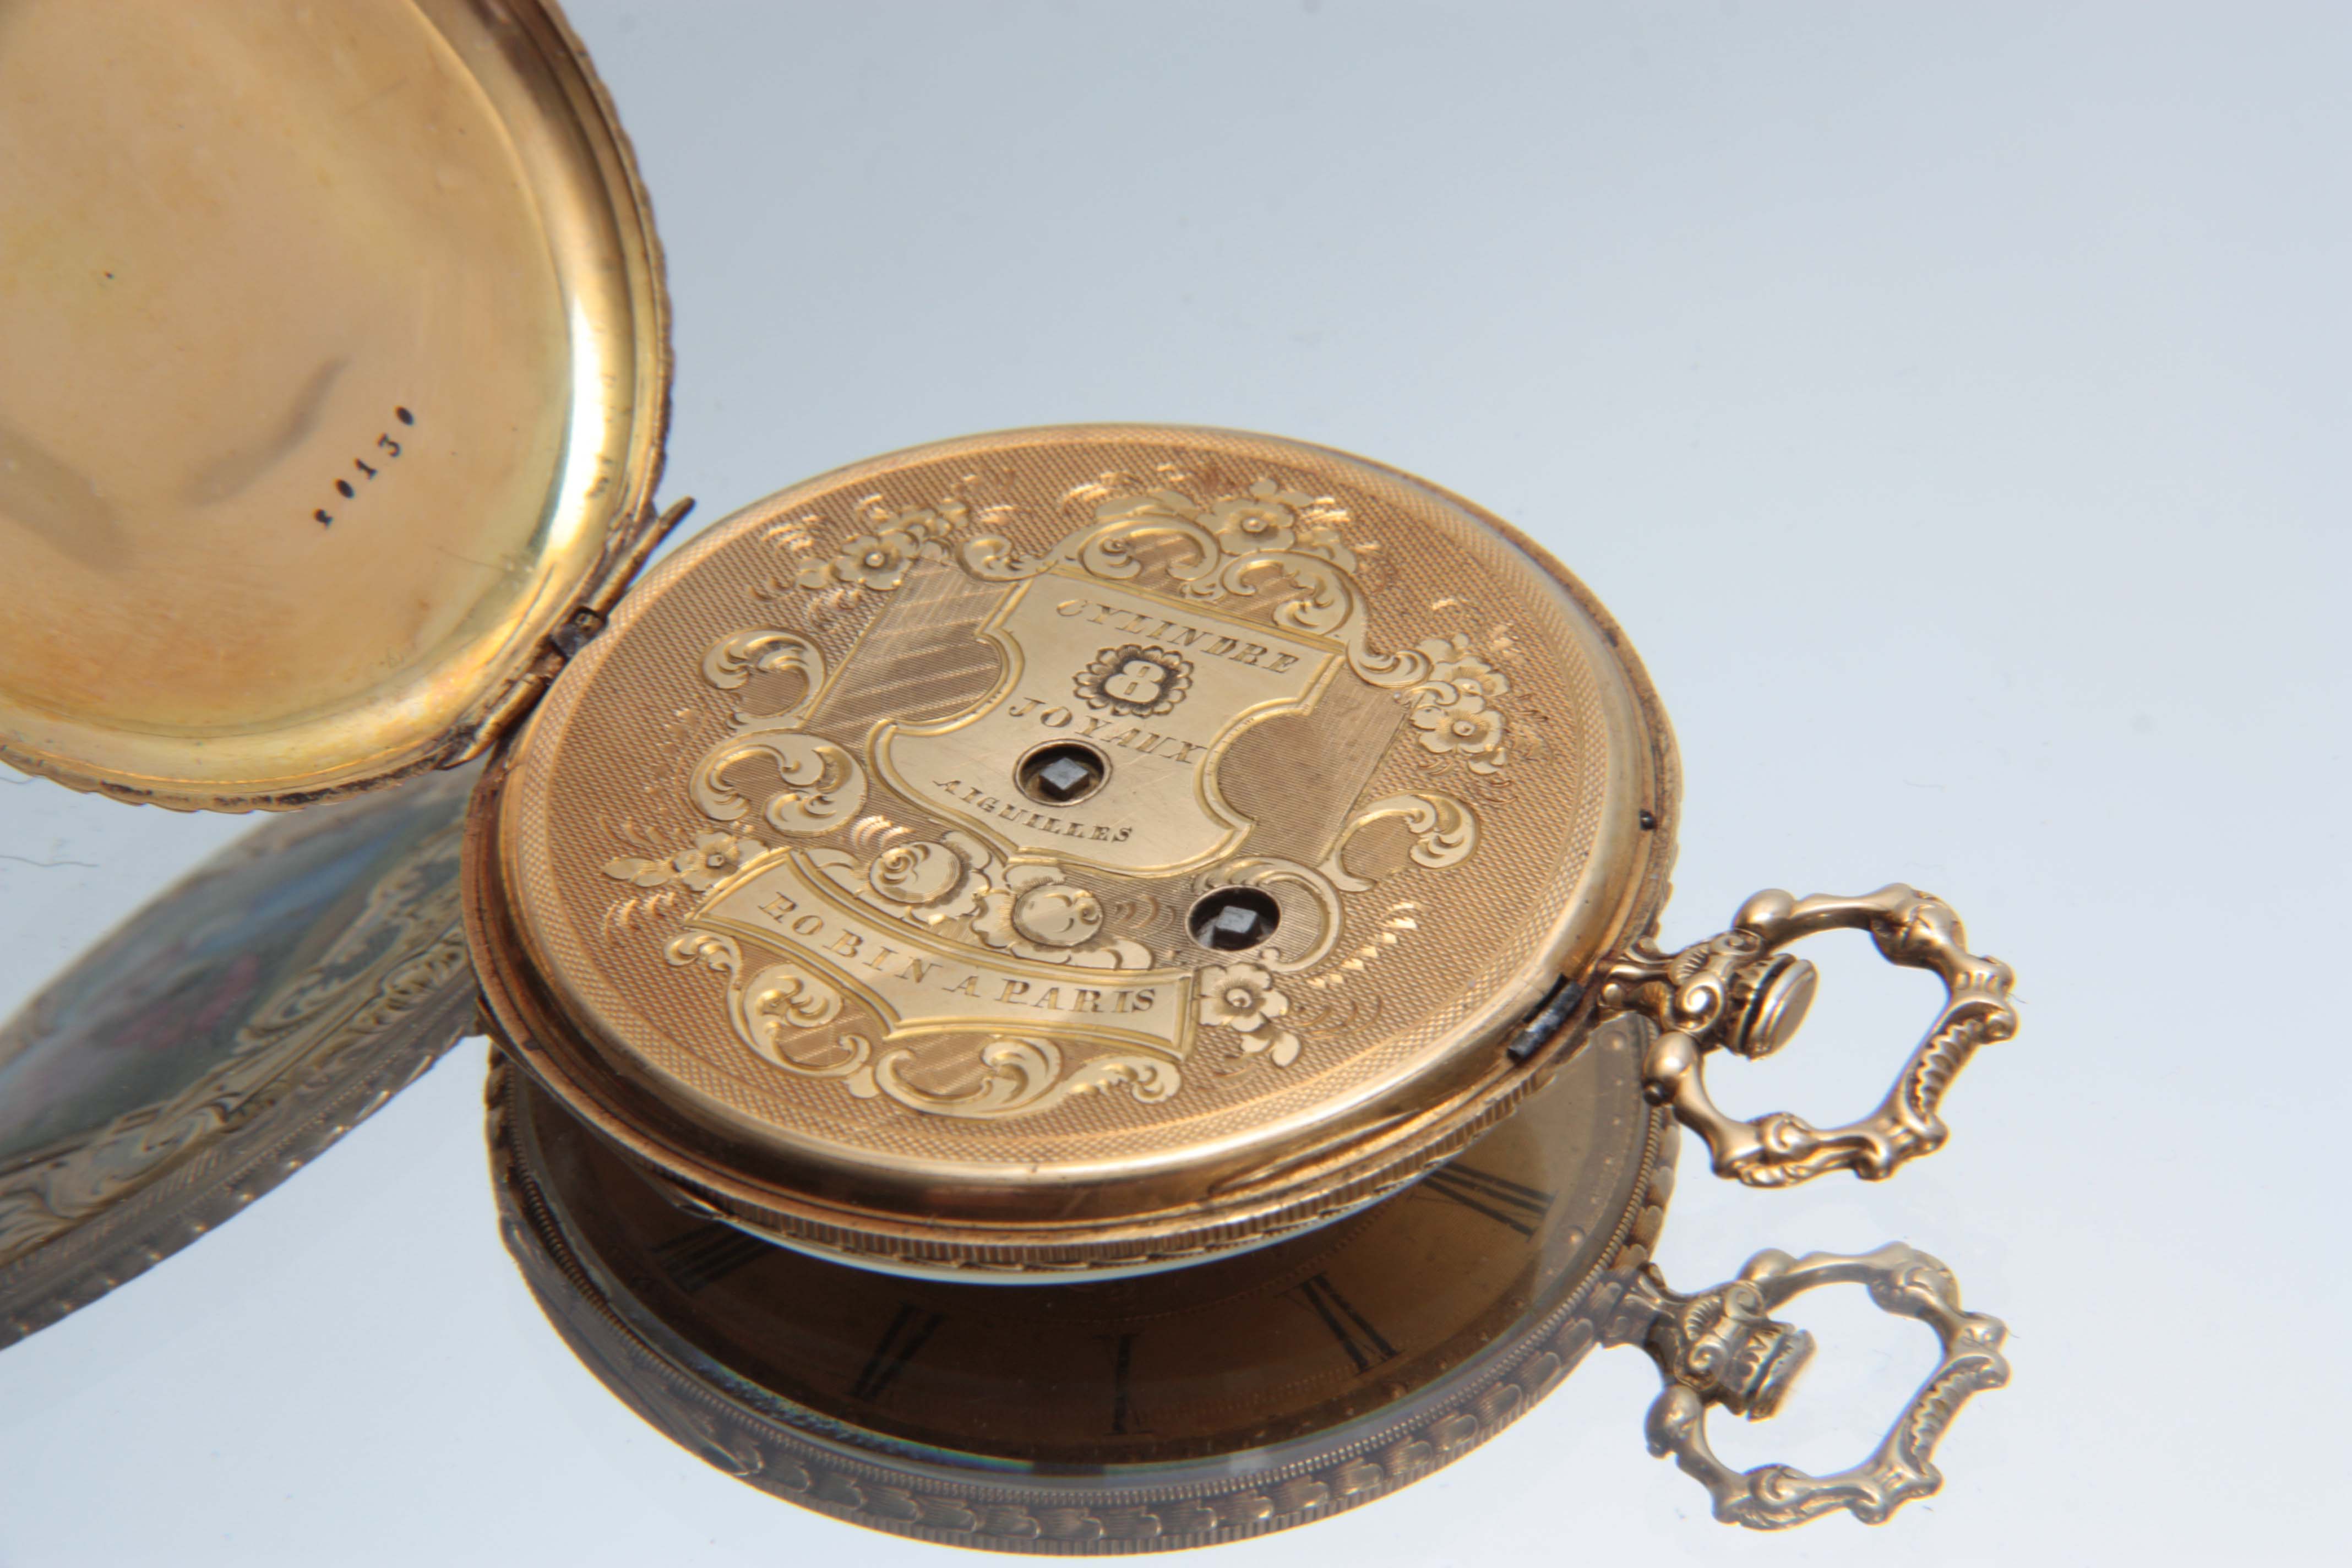 ROBIN, A PARIS. A LATE 19TH CENTURY 18CT GOLD AND ENAMEL POCKET WATCH the outer case back finely - Image 5 of 6